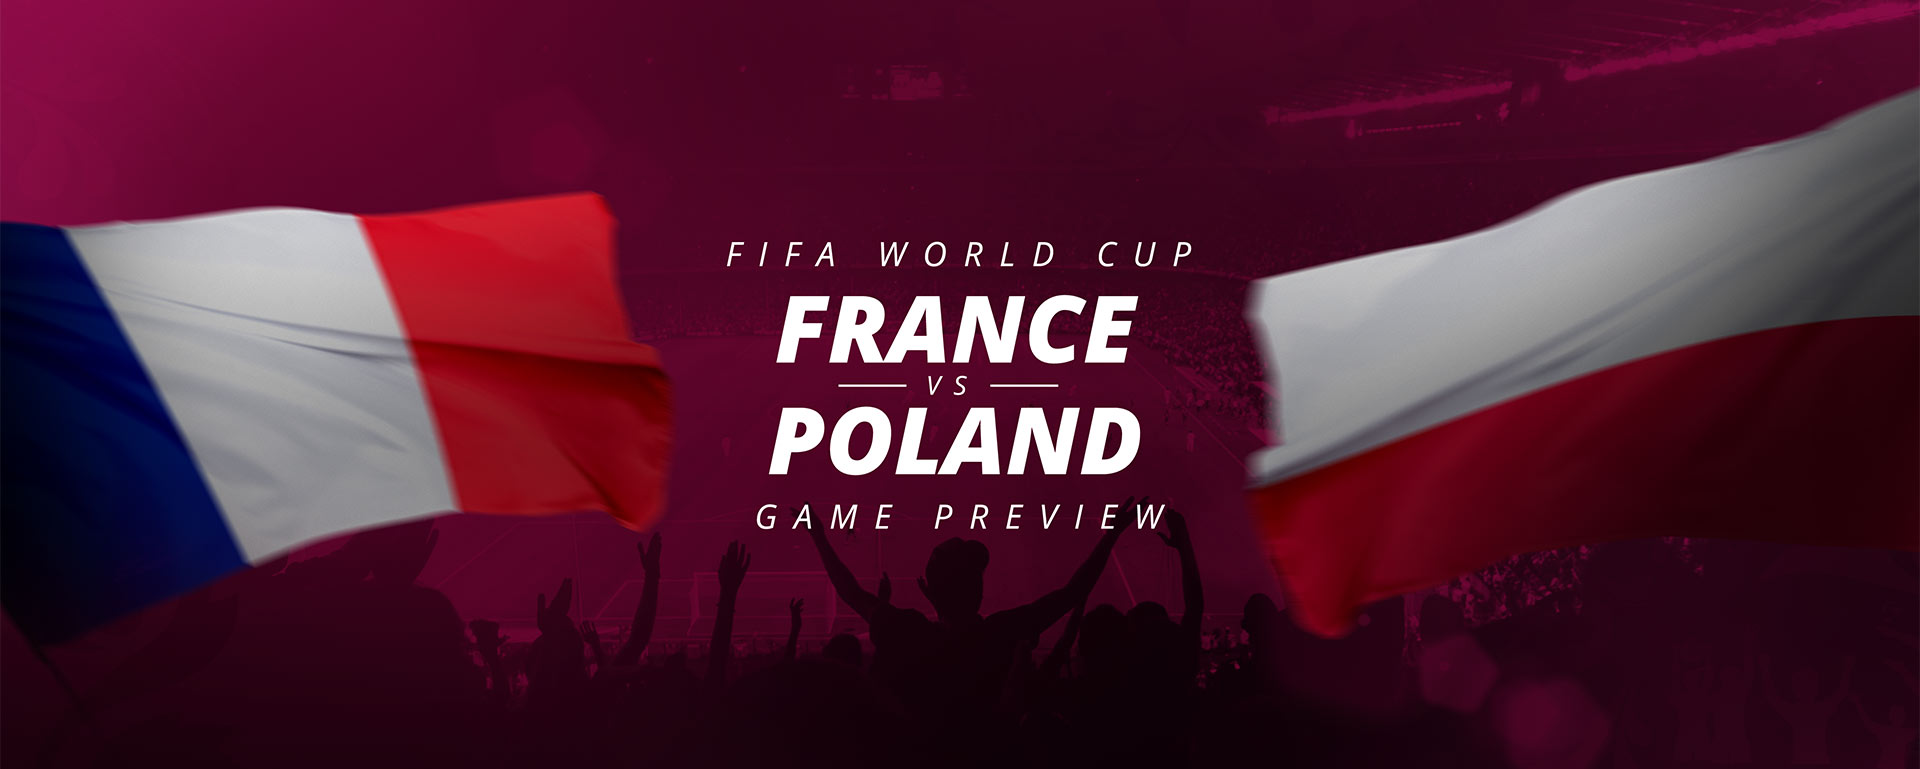 FIFA WORLD CUP: FRANCE V POLAND – GAME PREVIEW